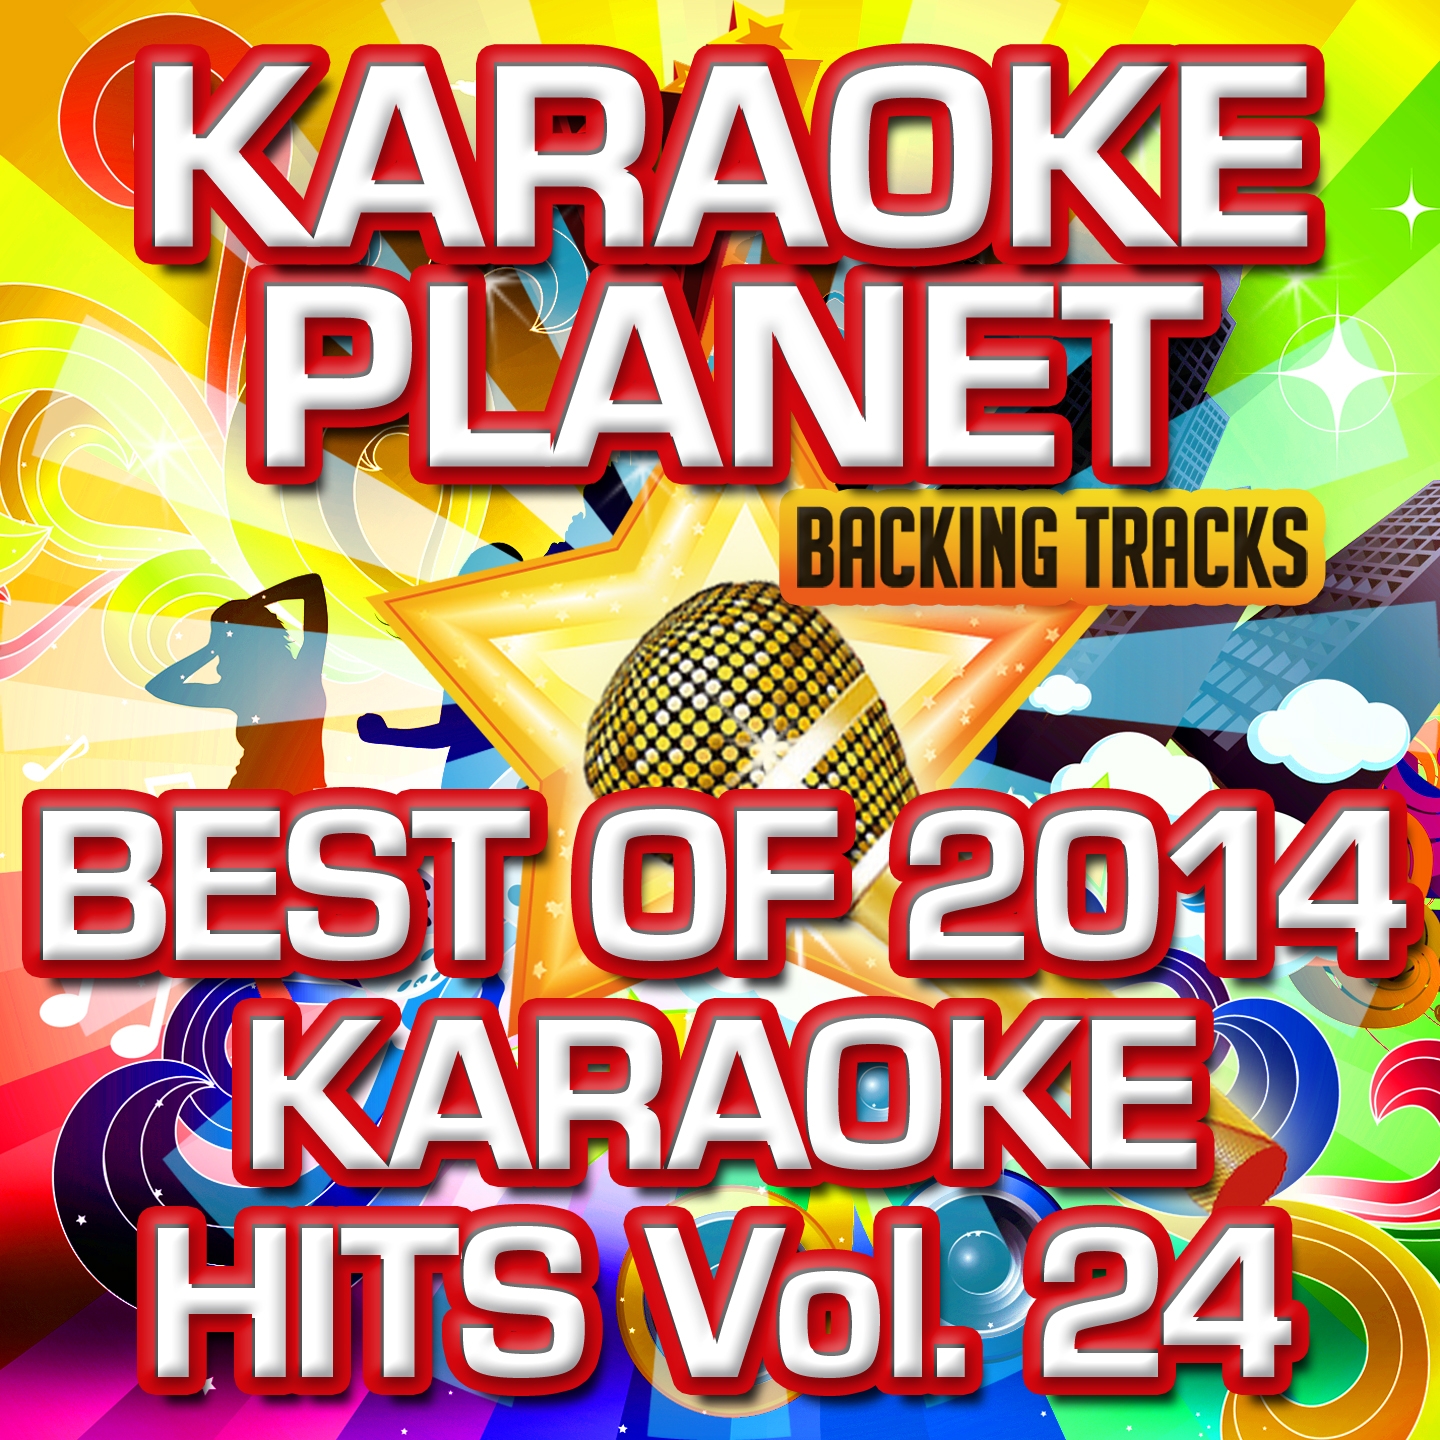 All of Me (Karaoke Version with Background Vocals)